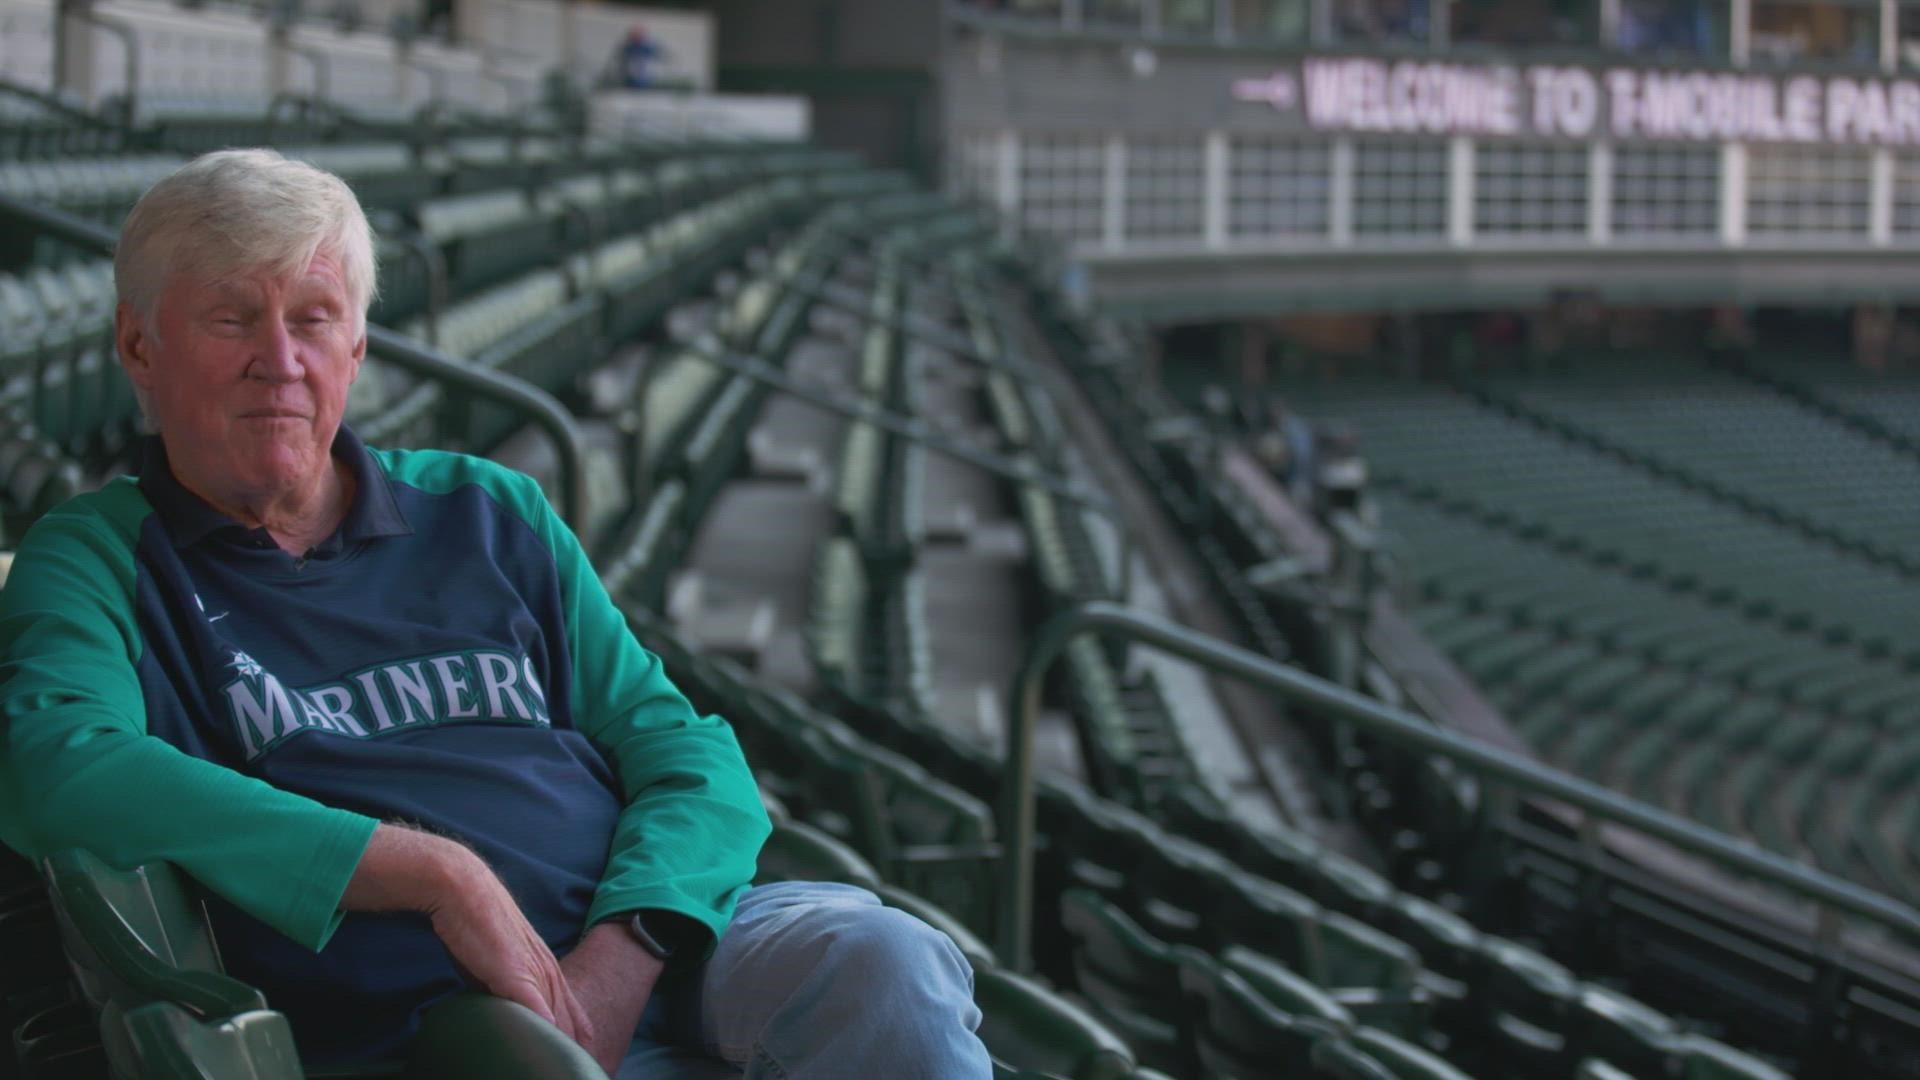 The majority owner of the Seattle Mariners said the current team is successful because of its culture.